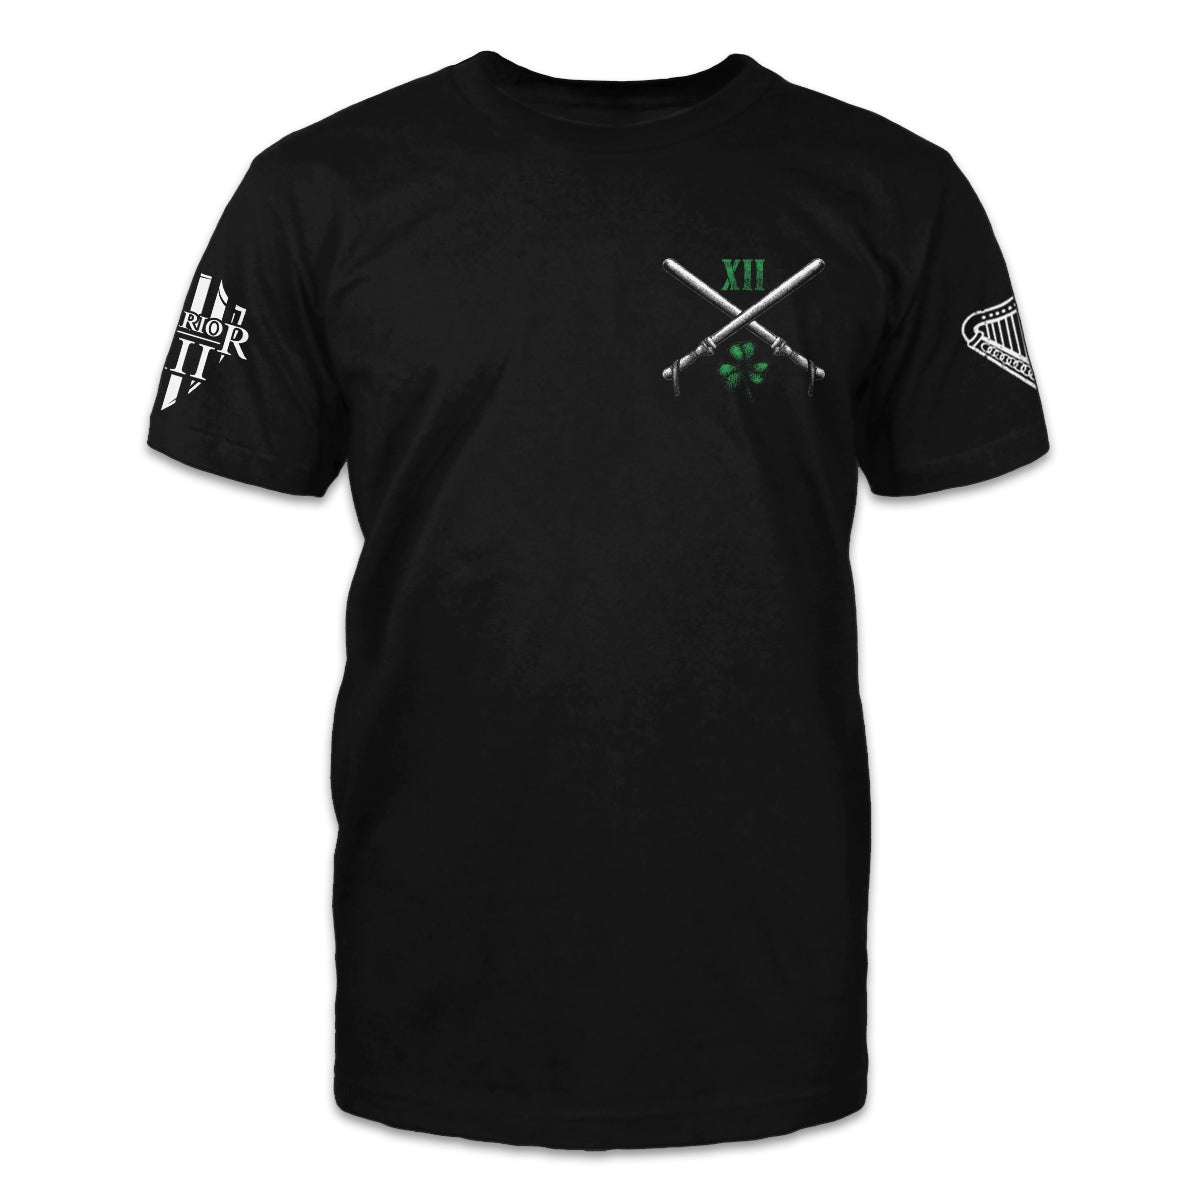 A black t-shirt with two batons crossed and XII printed on the front.